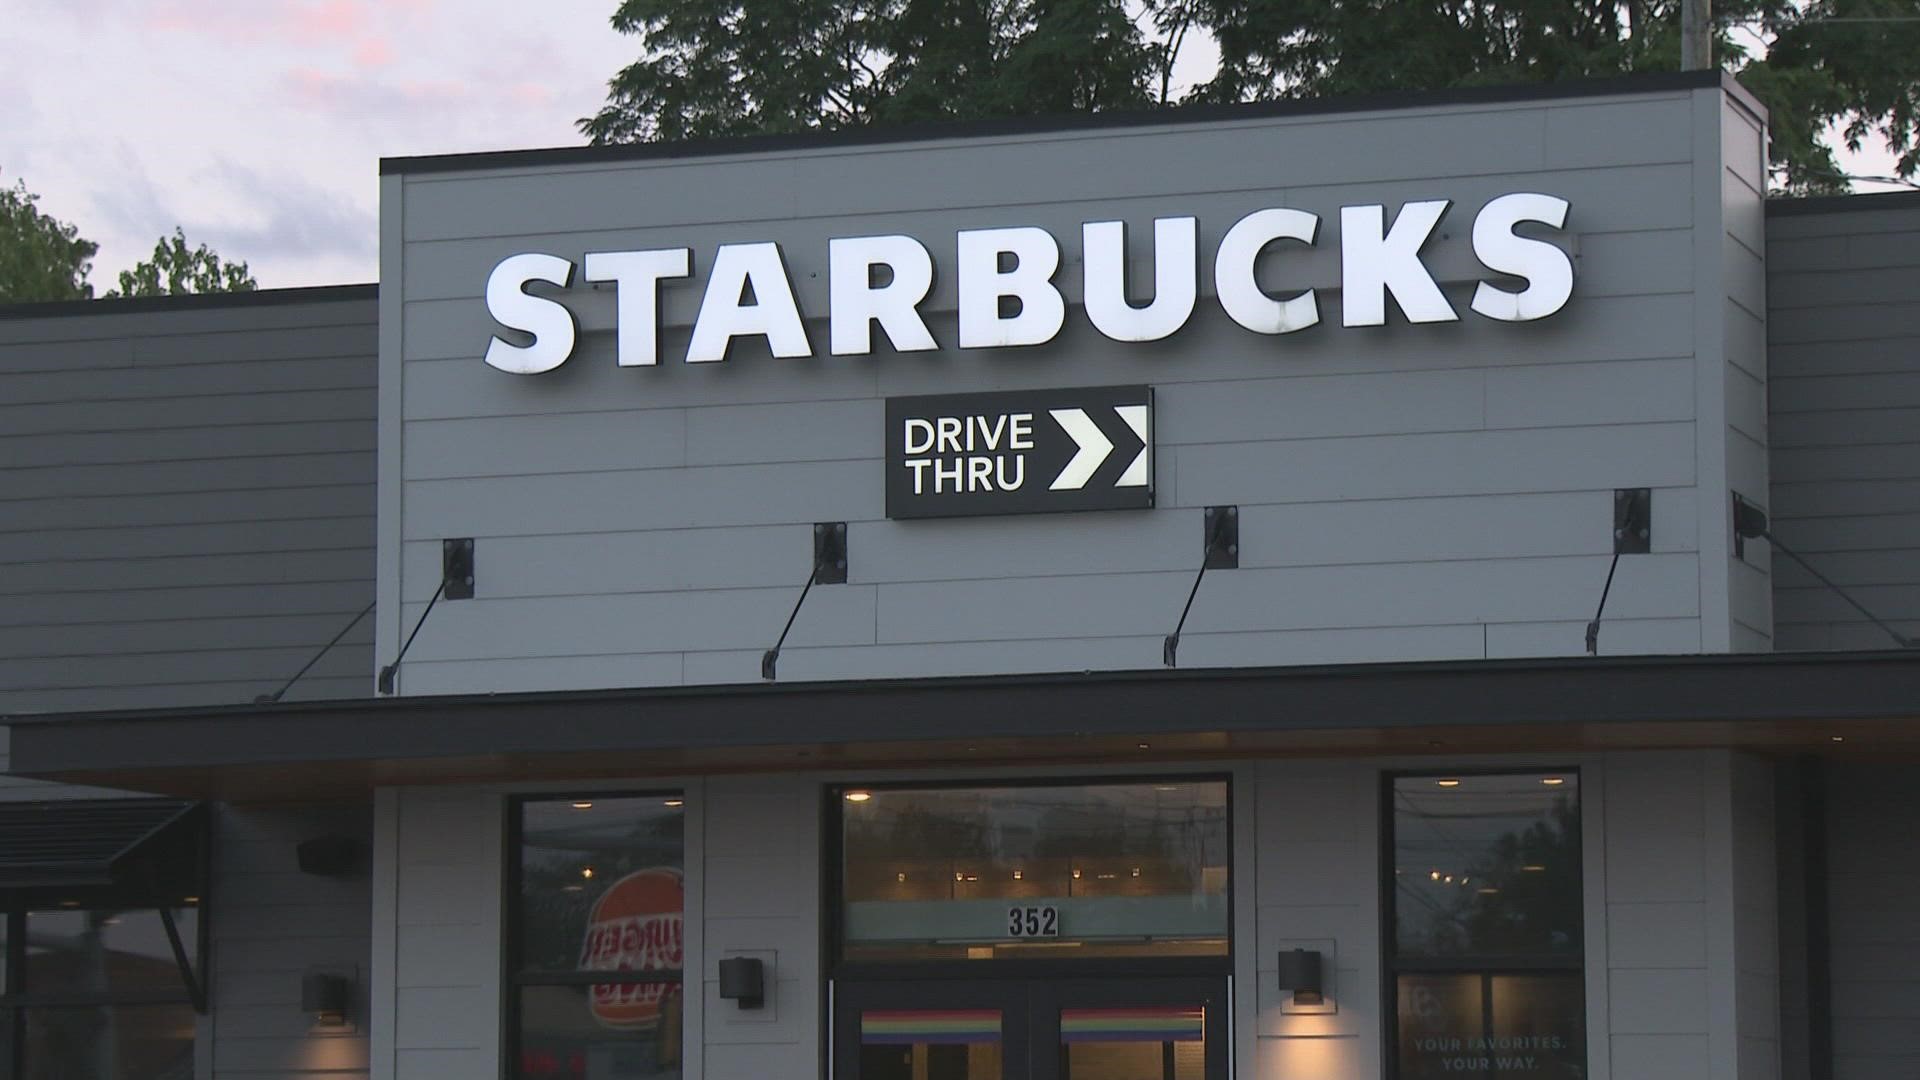 More than 220 U.S. Starbucks stores have voted to unionize since late last year. The Seattle coffee giant opposes the unionization effort.